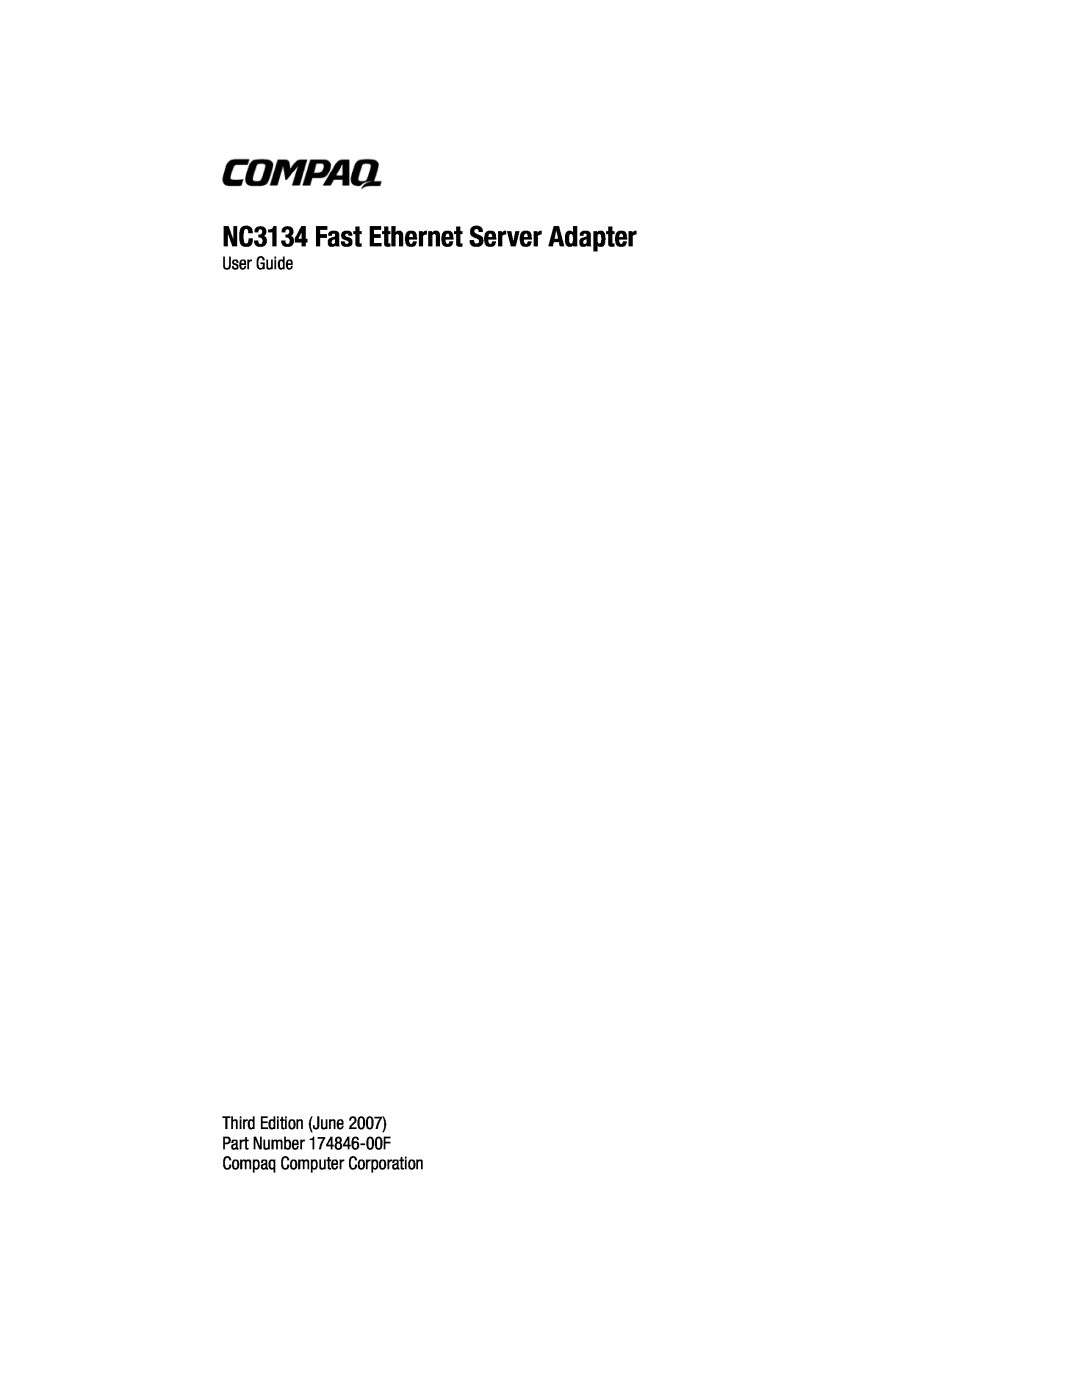 Compaq manual NC3134 Fast Ethernet Server Adapter, User Guide Third Edition June Part Number 174846-00F 